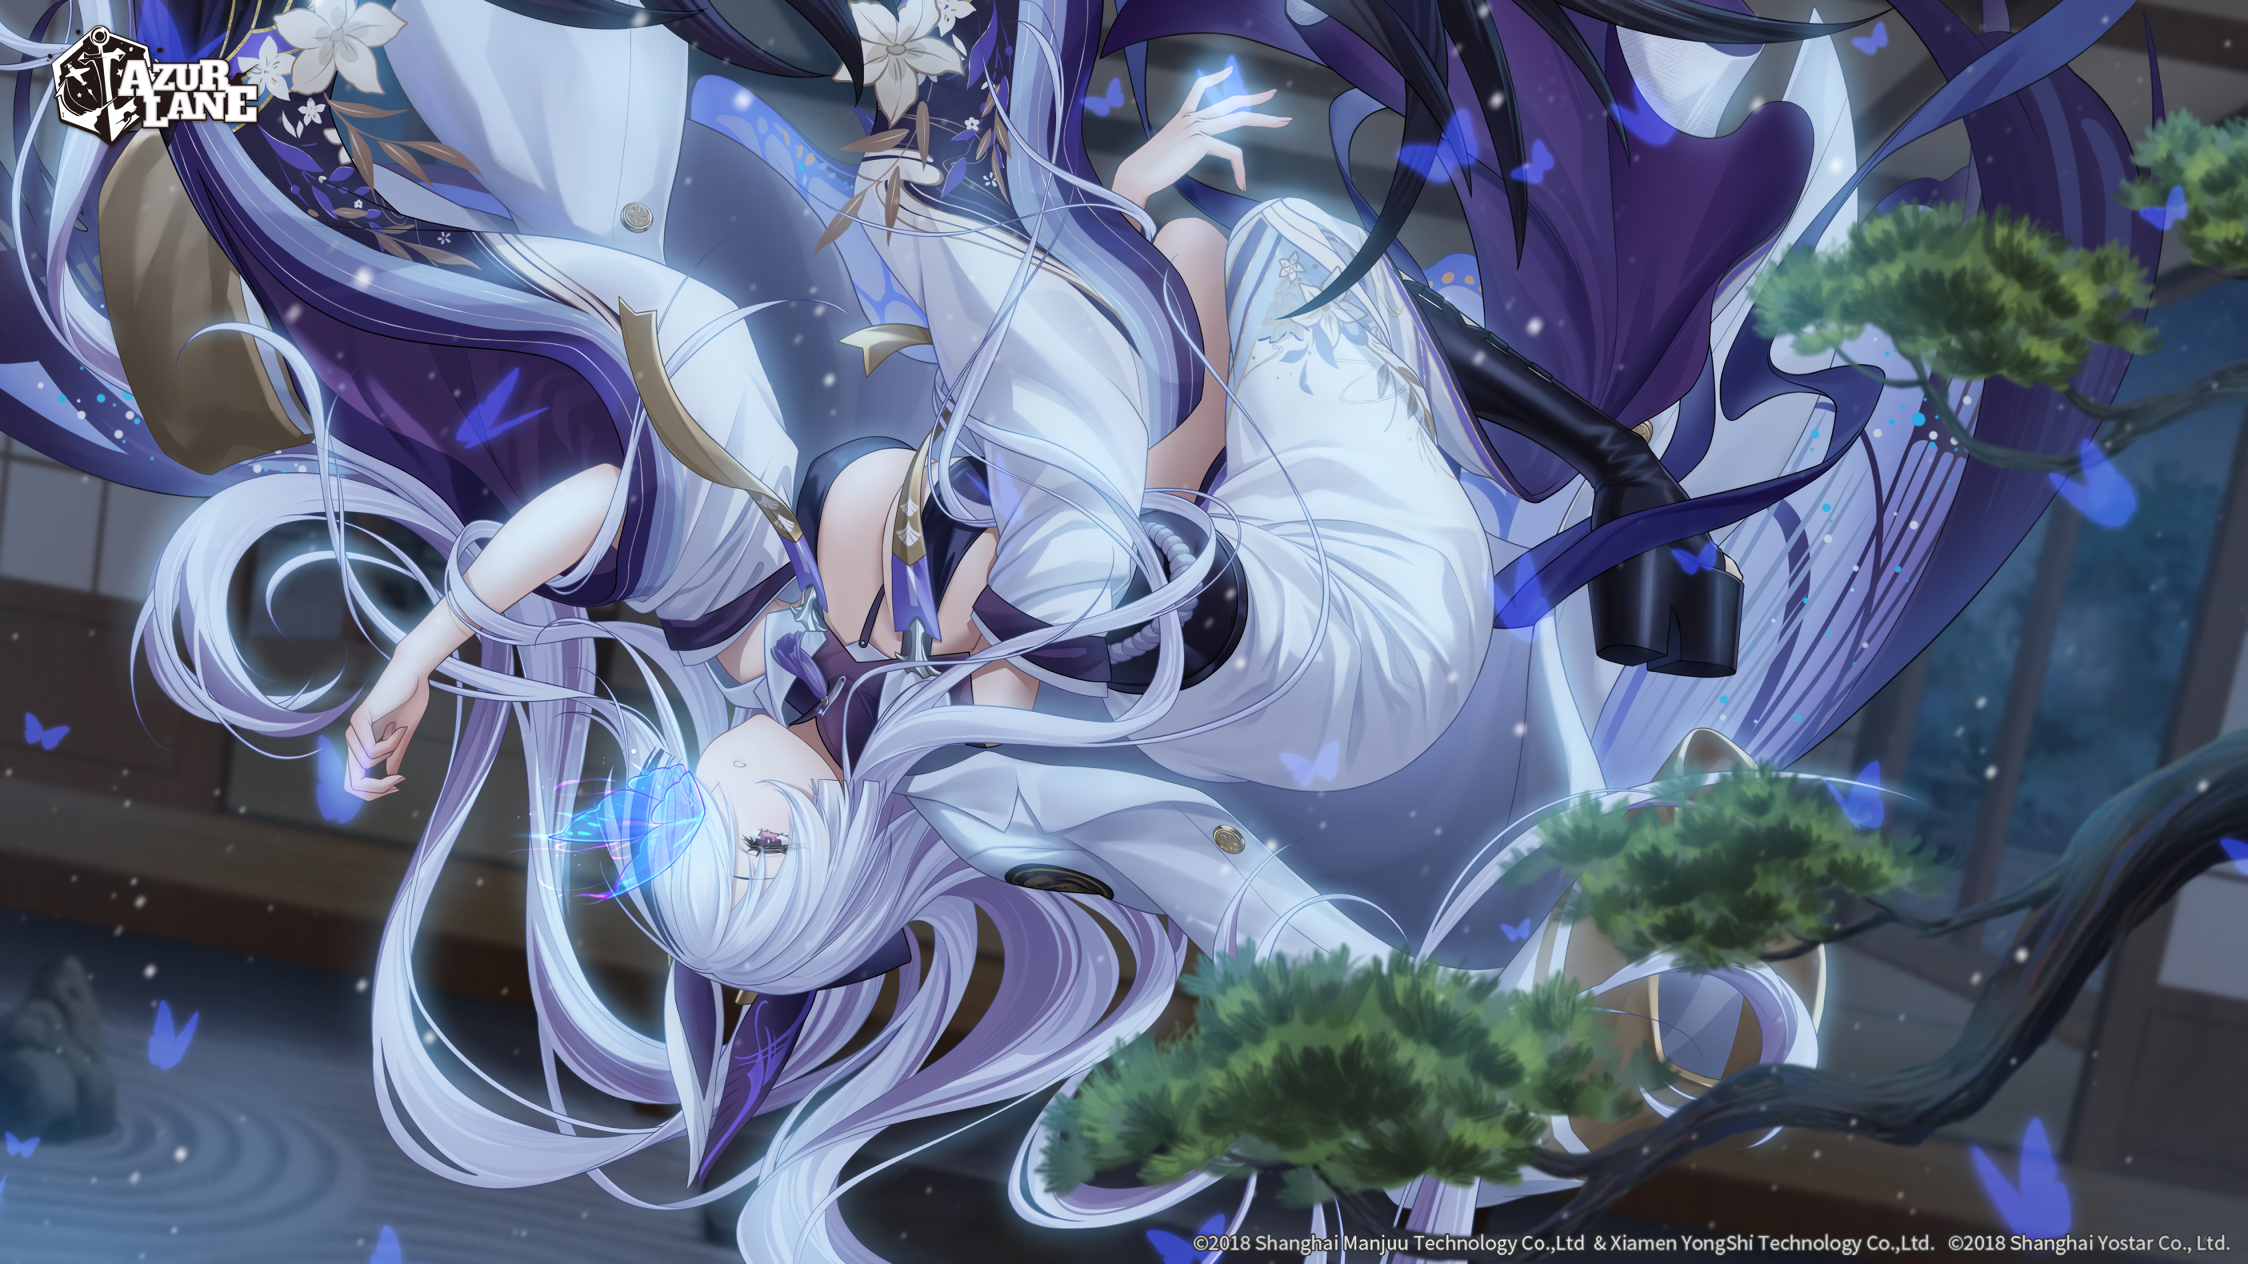 Anime 2248x1264 anime anime girls Azur Lane upside down butterfly watermarked Unzen (Azur Lane) branch HaneRu long hair video game girls flowers video game characters title insect big boobs